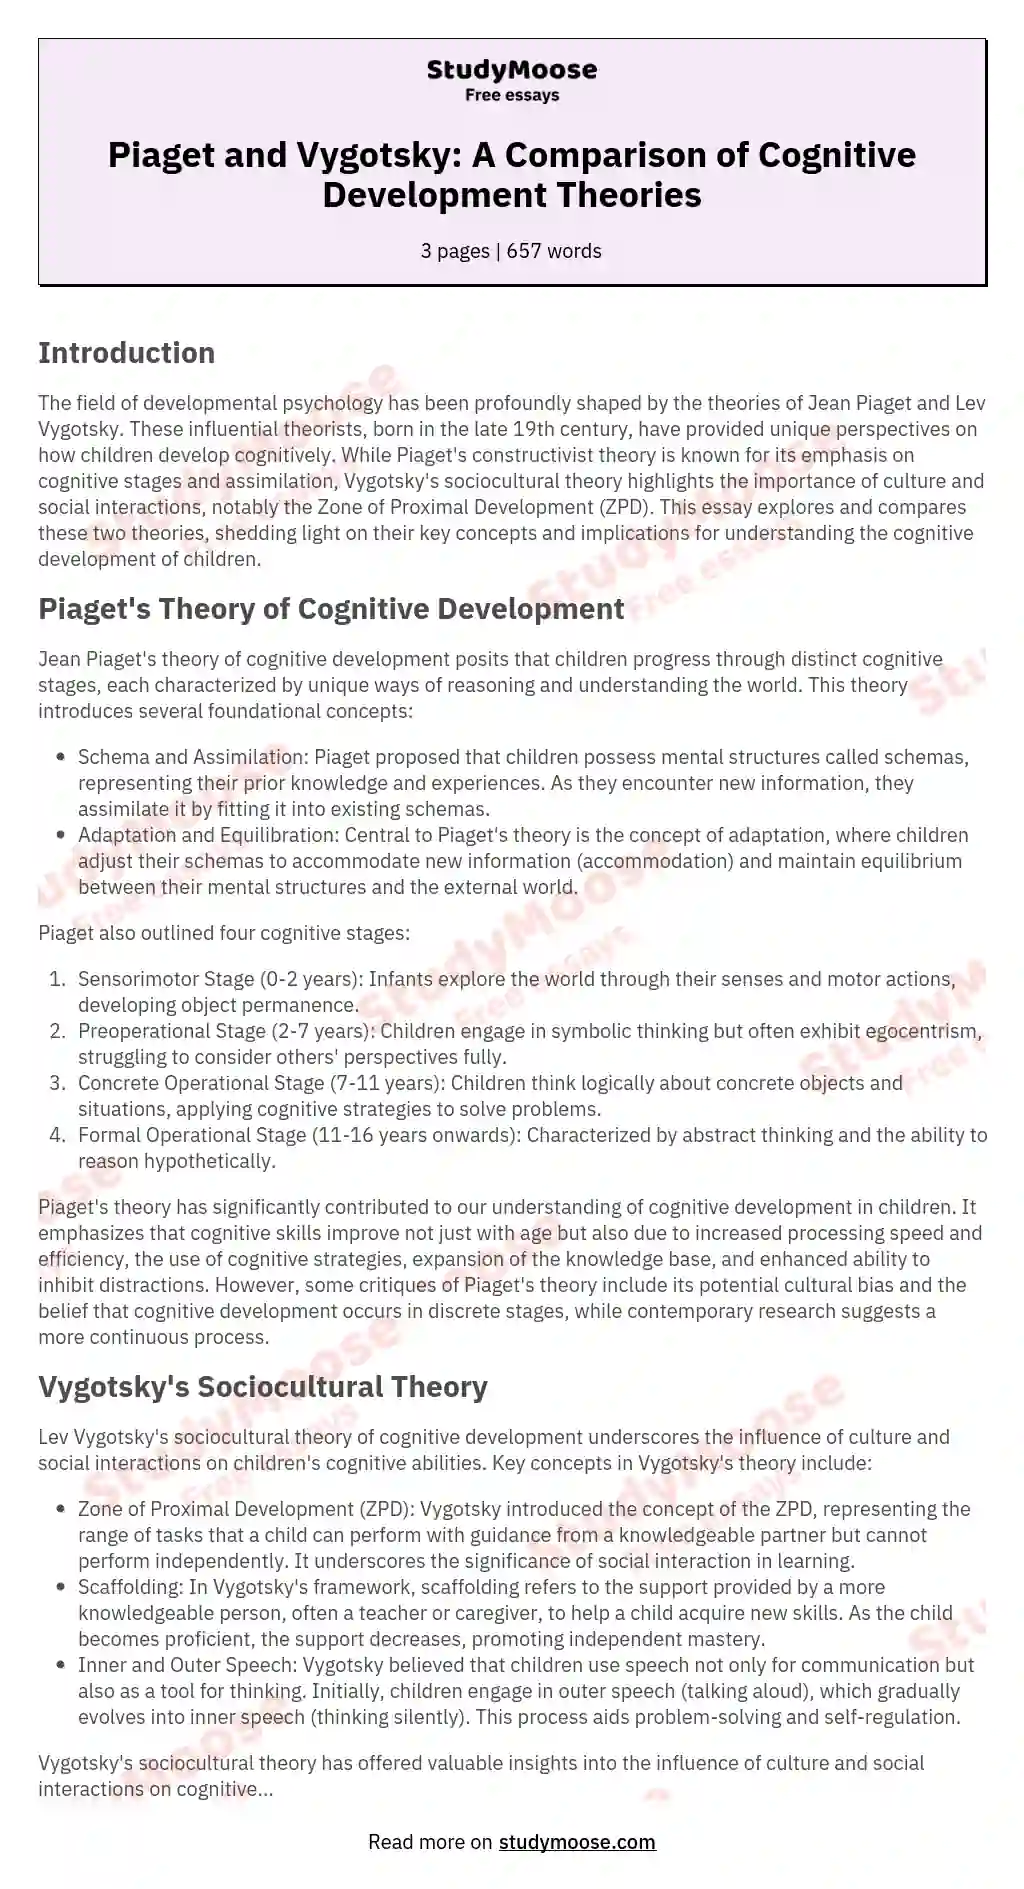 Piaget and Vygotsky: A Comparison of Cognitive Development Theories essay